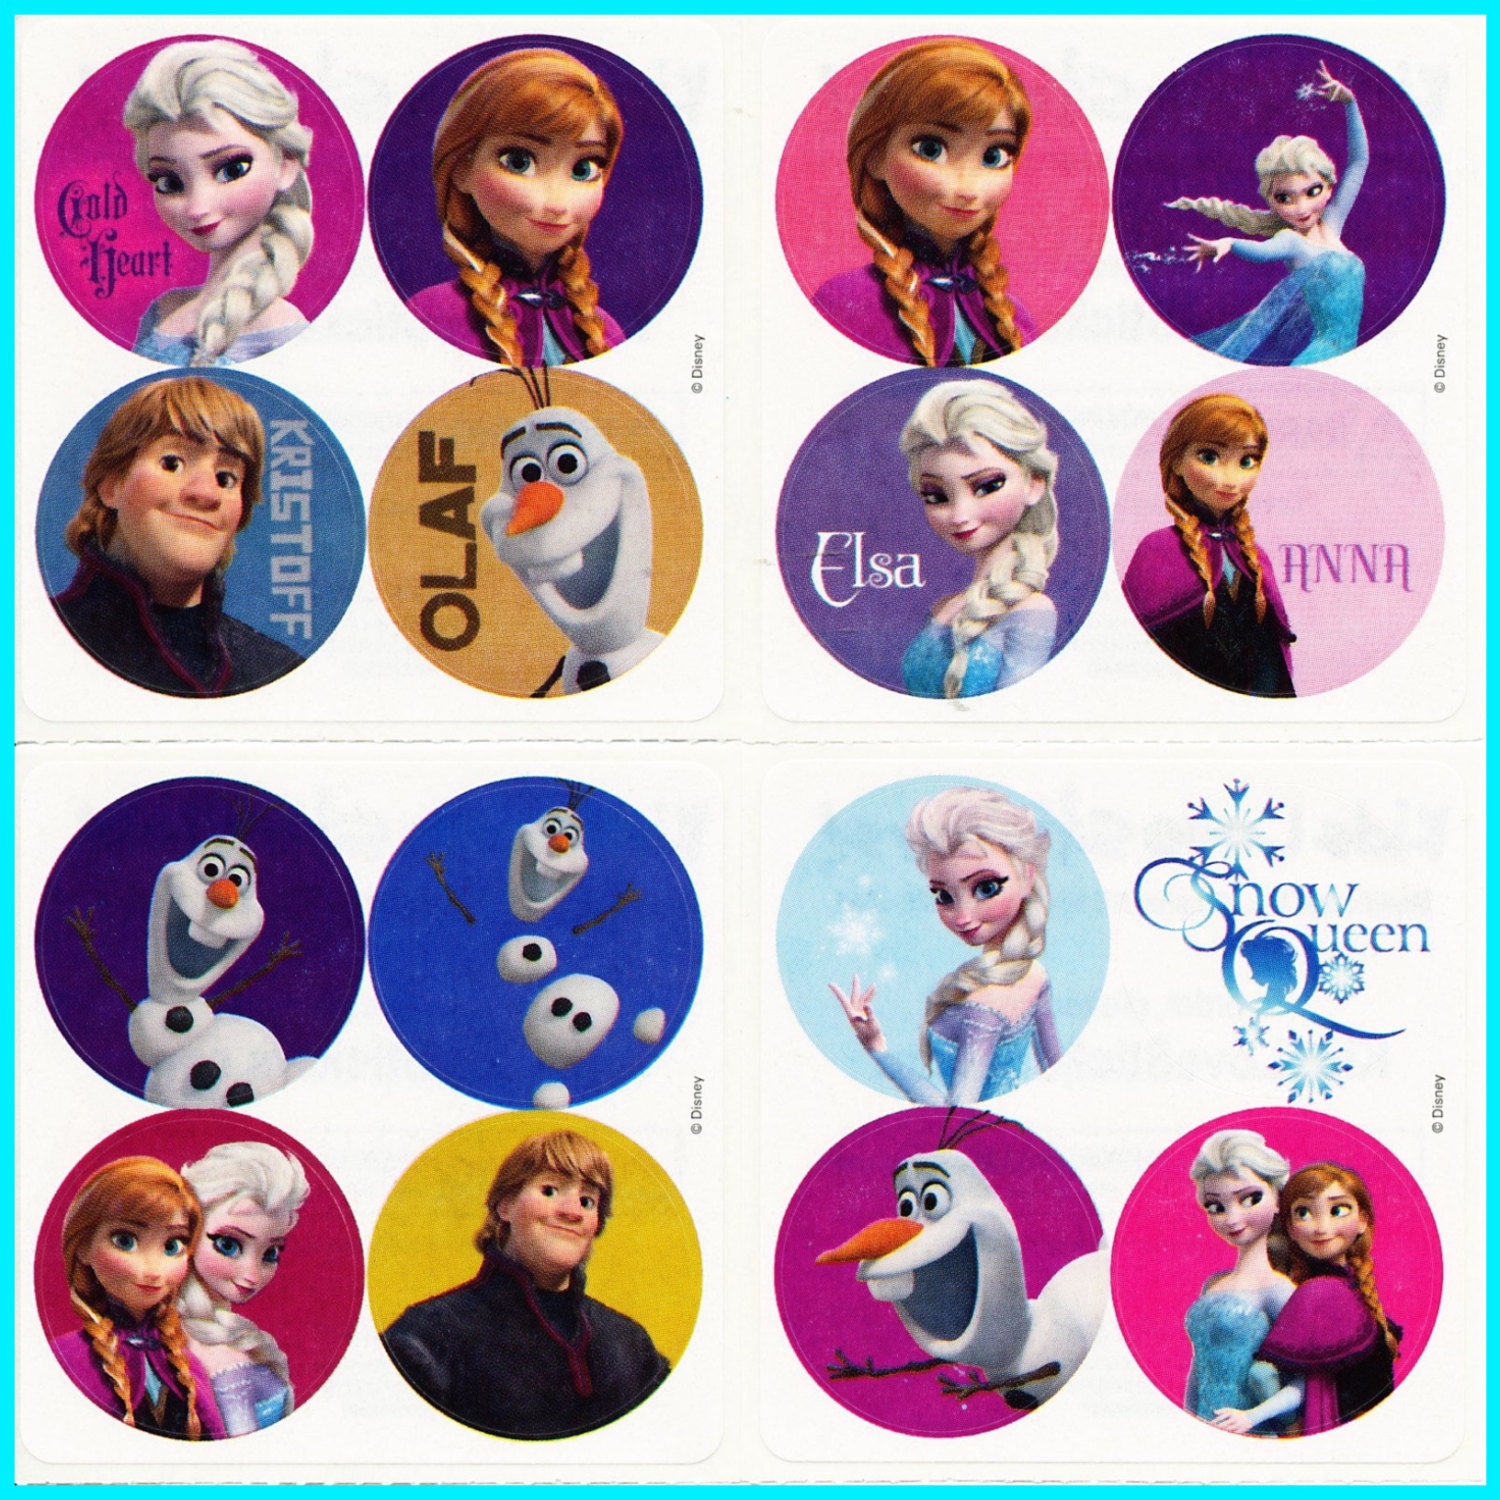 Rewards Large Stickers Party Favors 15 Frozen Anna and Elsa 